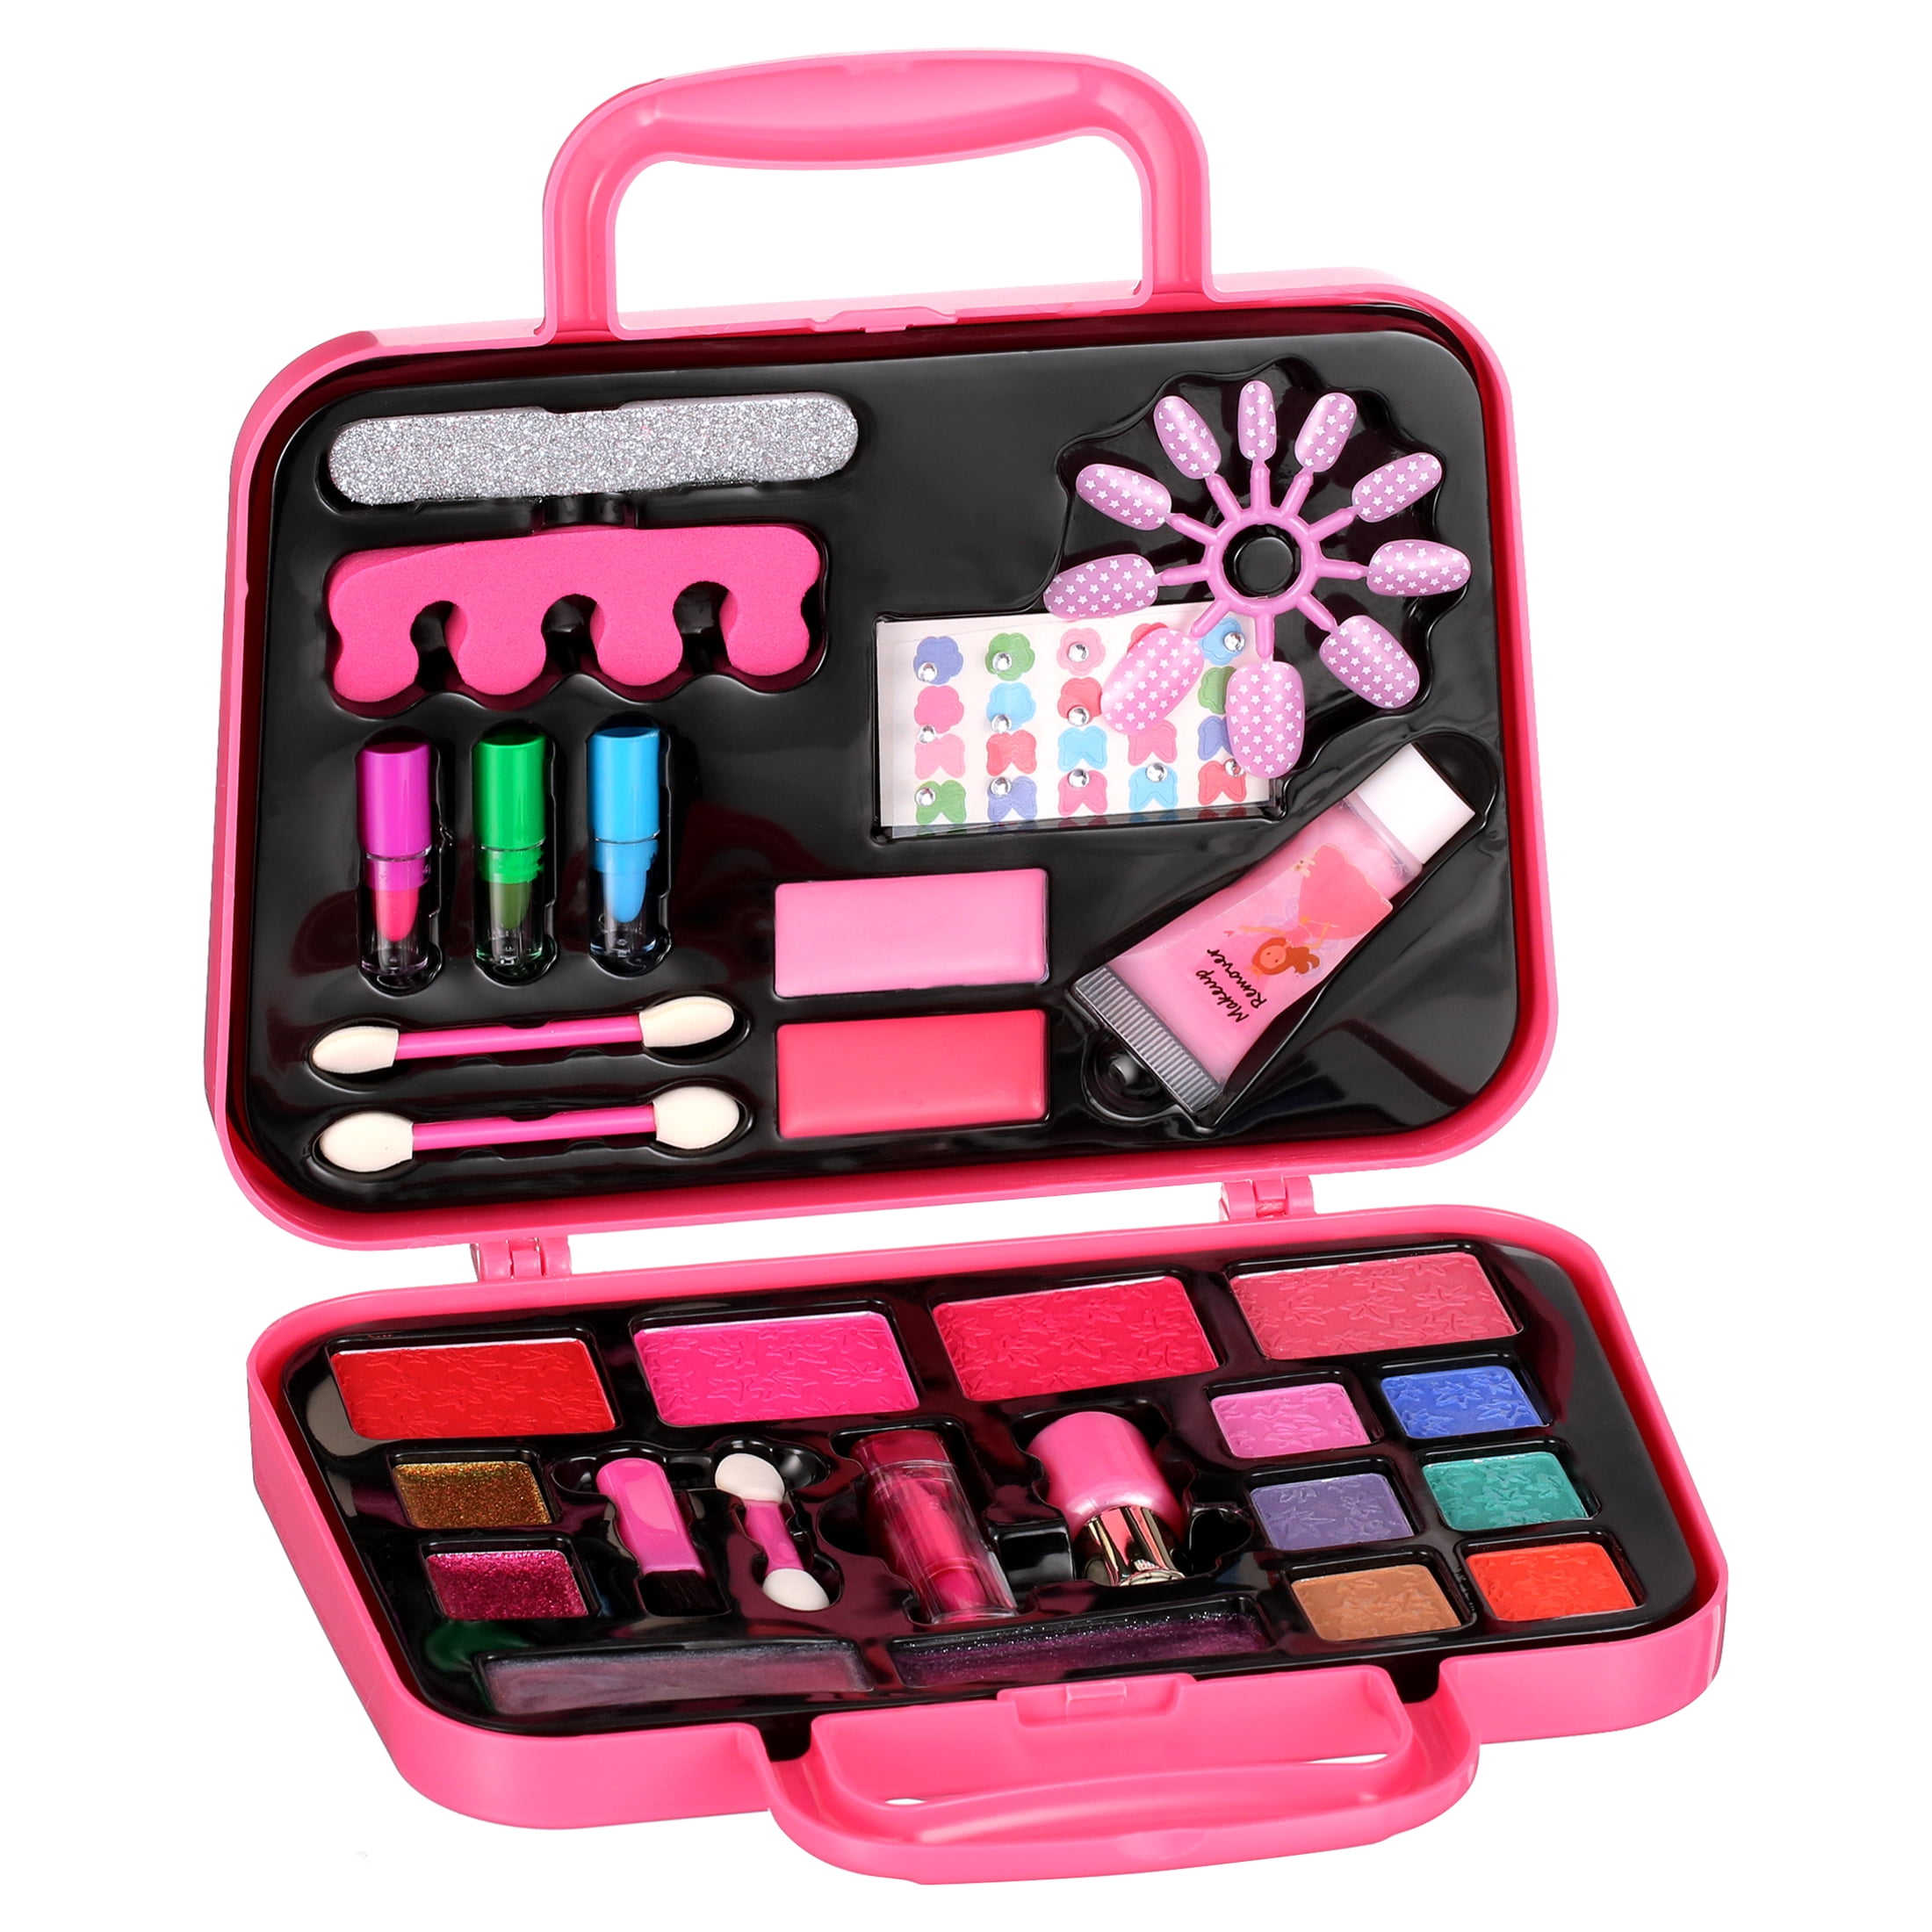 Wattne Kids Makeup Kit for Girls 42pcs Washable Real Cosmetic, Safe & Non-Toxic Little Girl Makeup Set, Frozen Makeup Set for 3-12 Year Old Kids